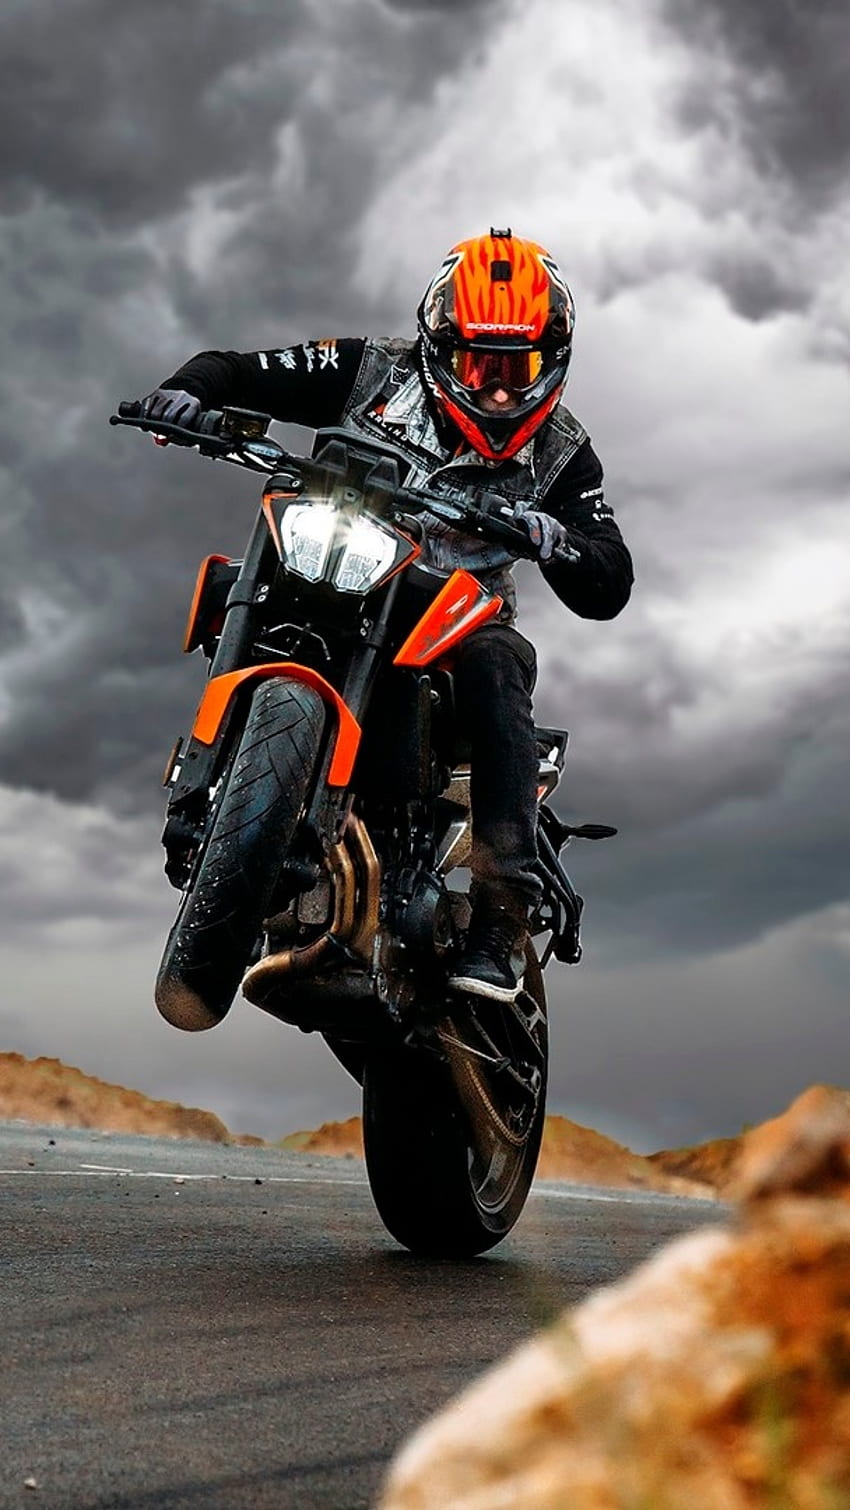 KTM Bike Showroom in Electronic City,Bangalore - Best Motorcycle Dealers in  Bangalore - Justdial